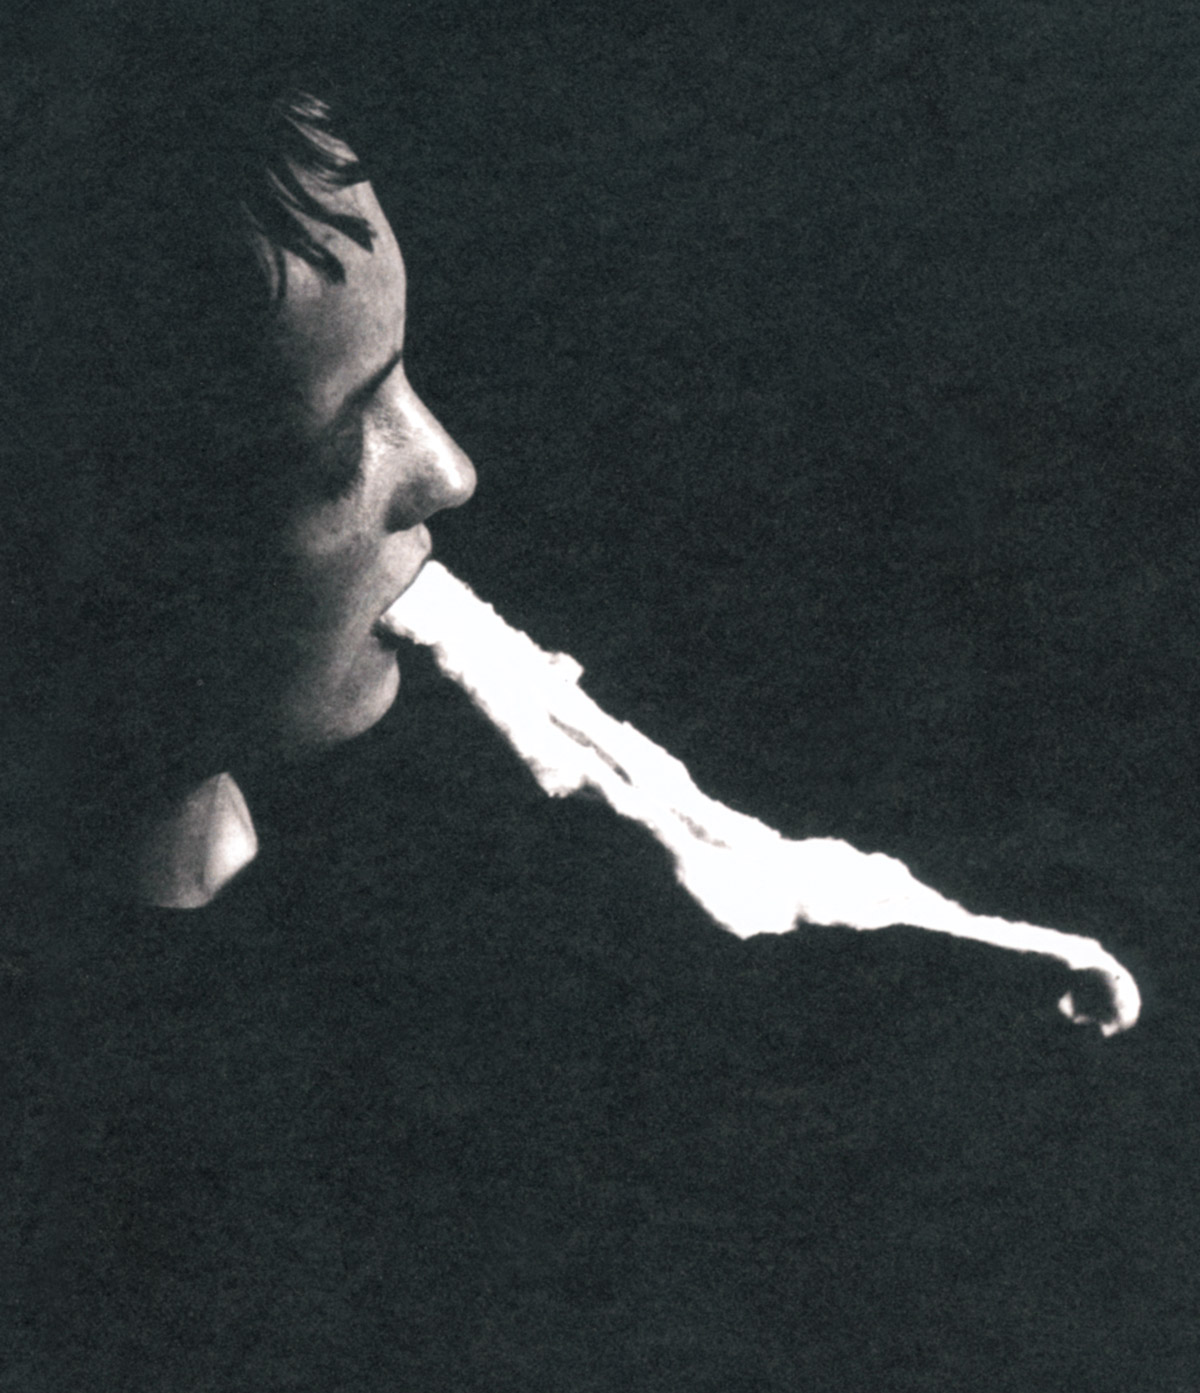 A photograph of Stanislawa P. during the séance of 25 January 1913, ectoplasm streaming from her mouth.